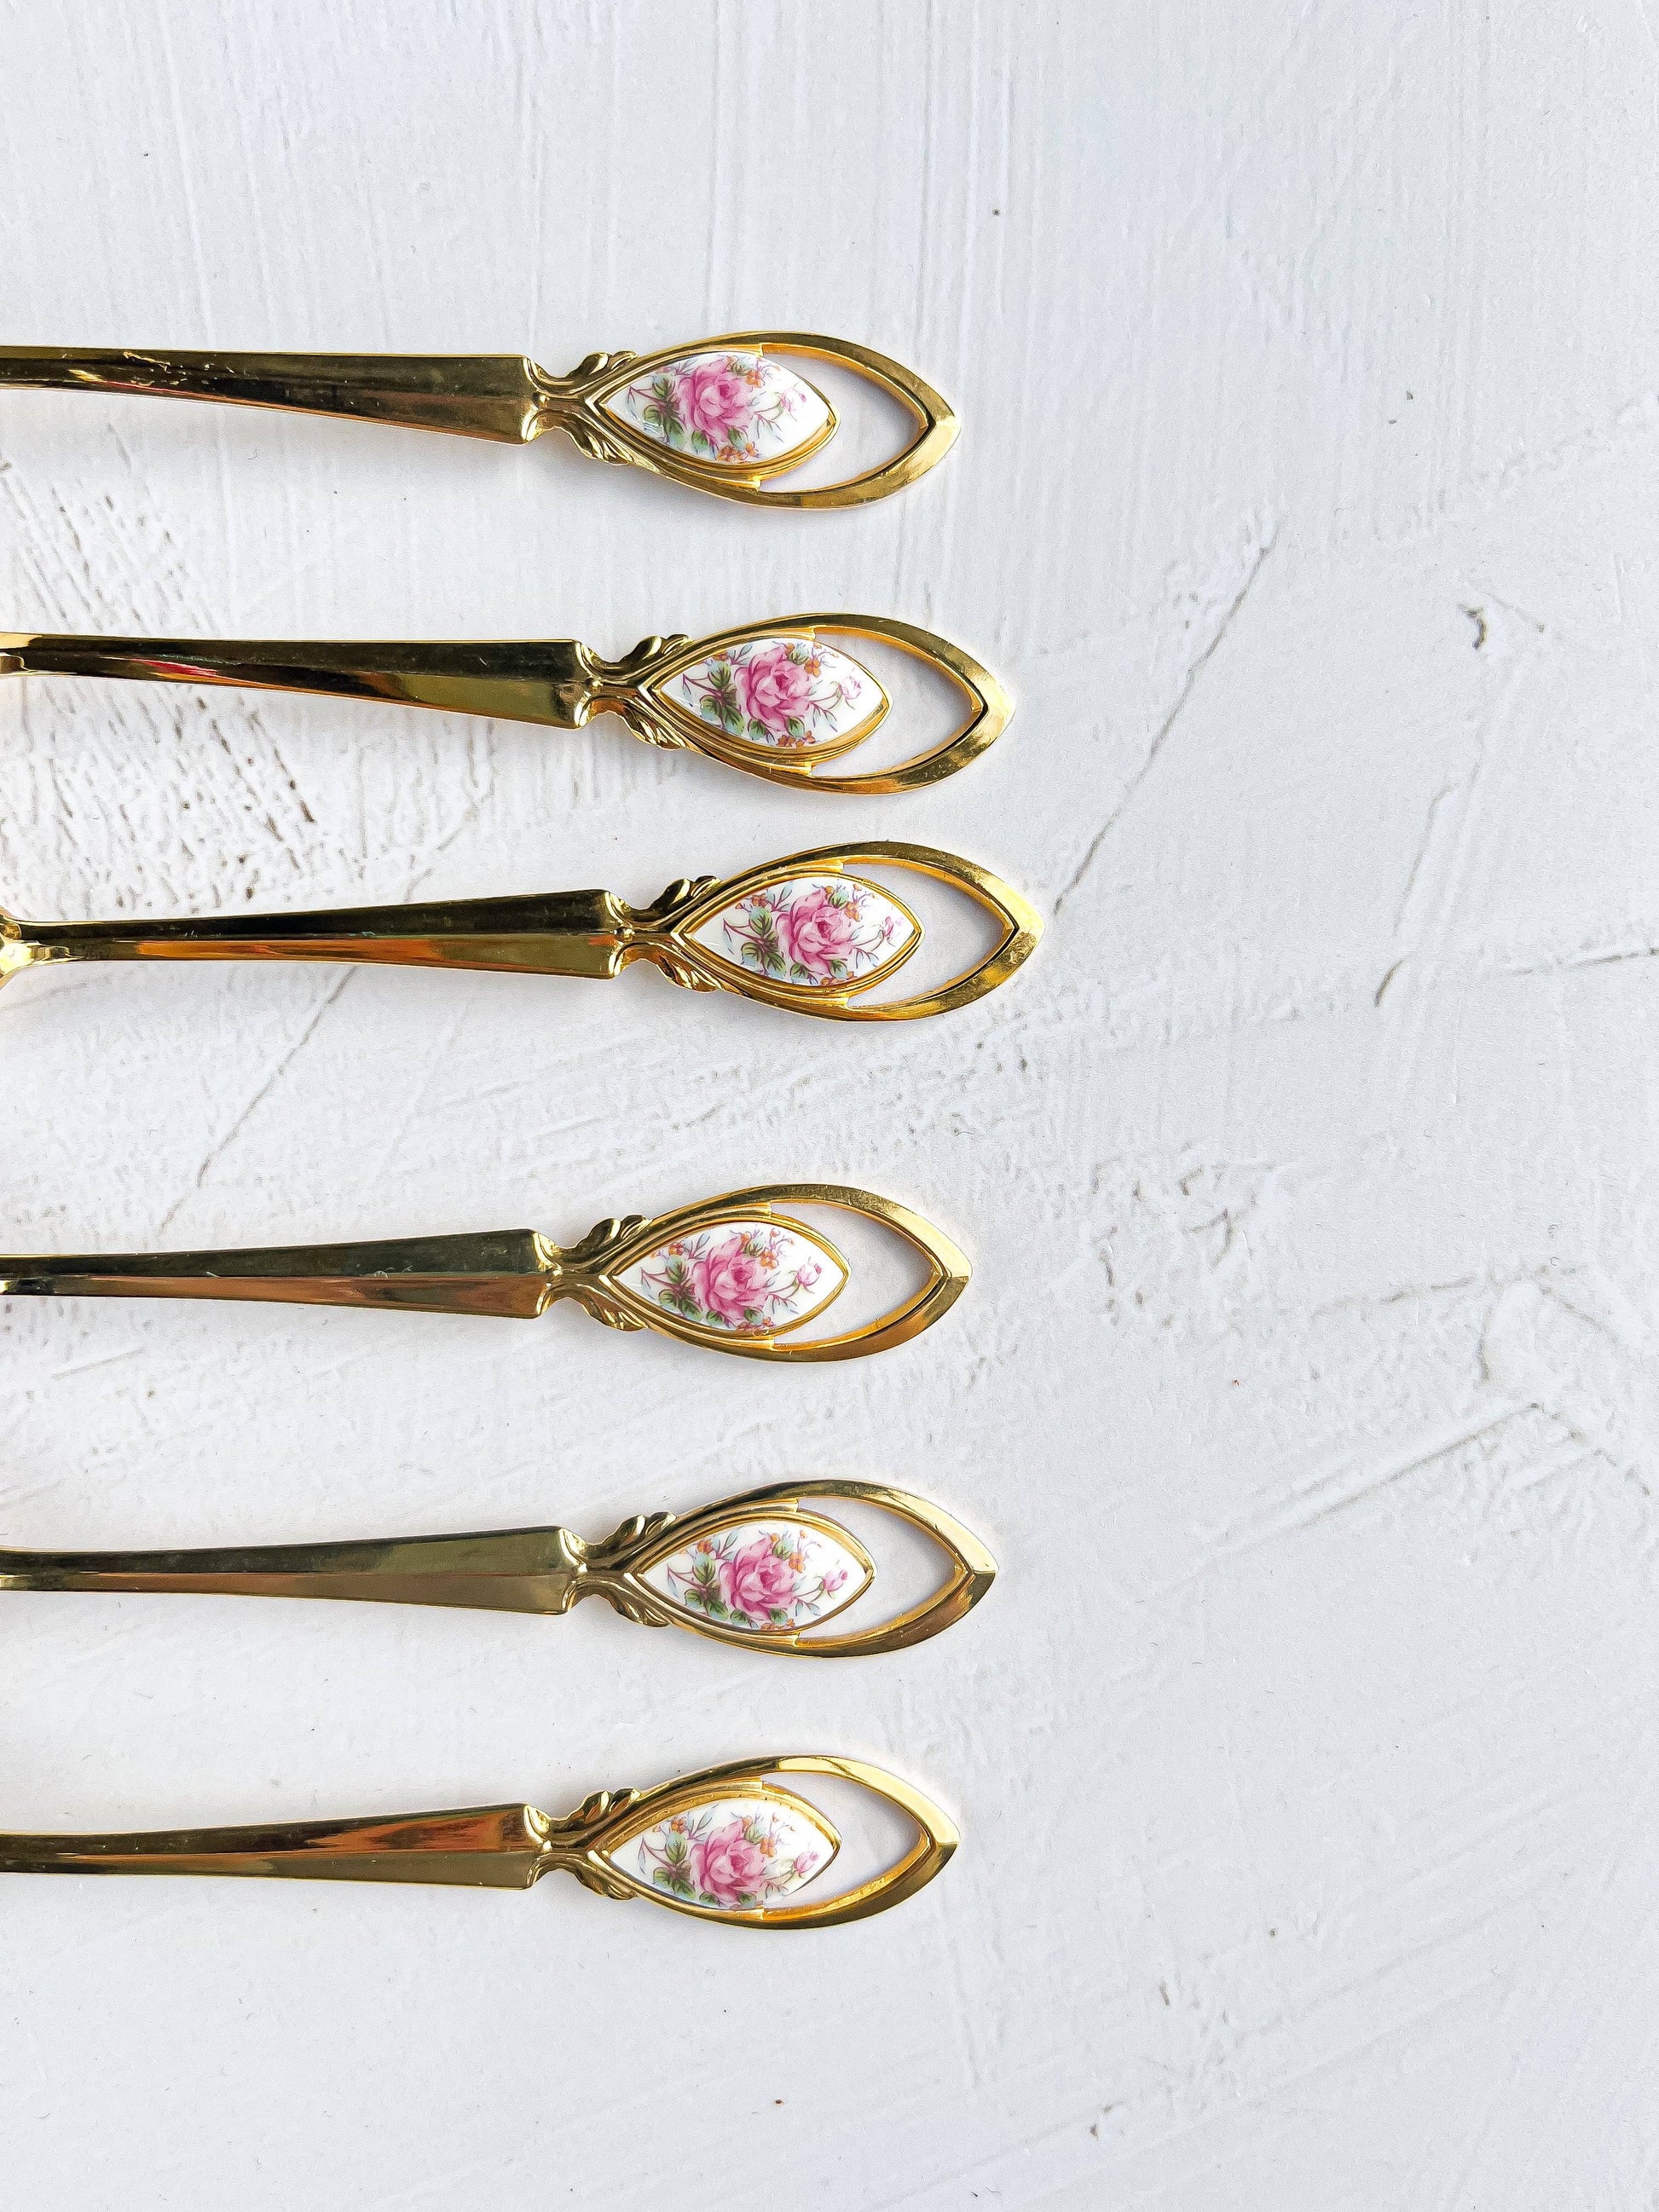 Greensons Set of 6 Gold-Plated Teaspoons - 'Wild Rose' Collection - SOSC Home